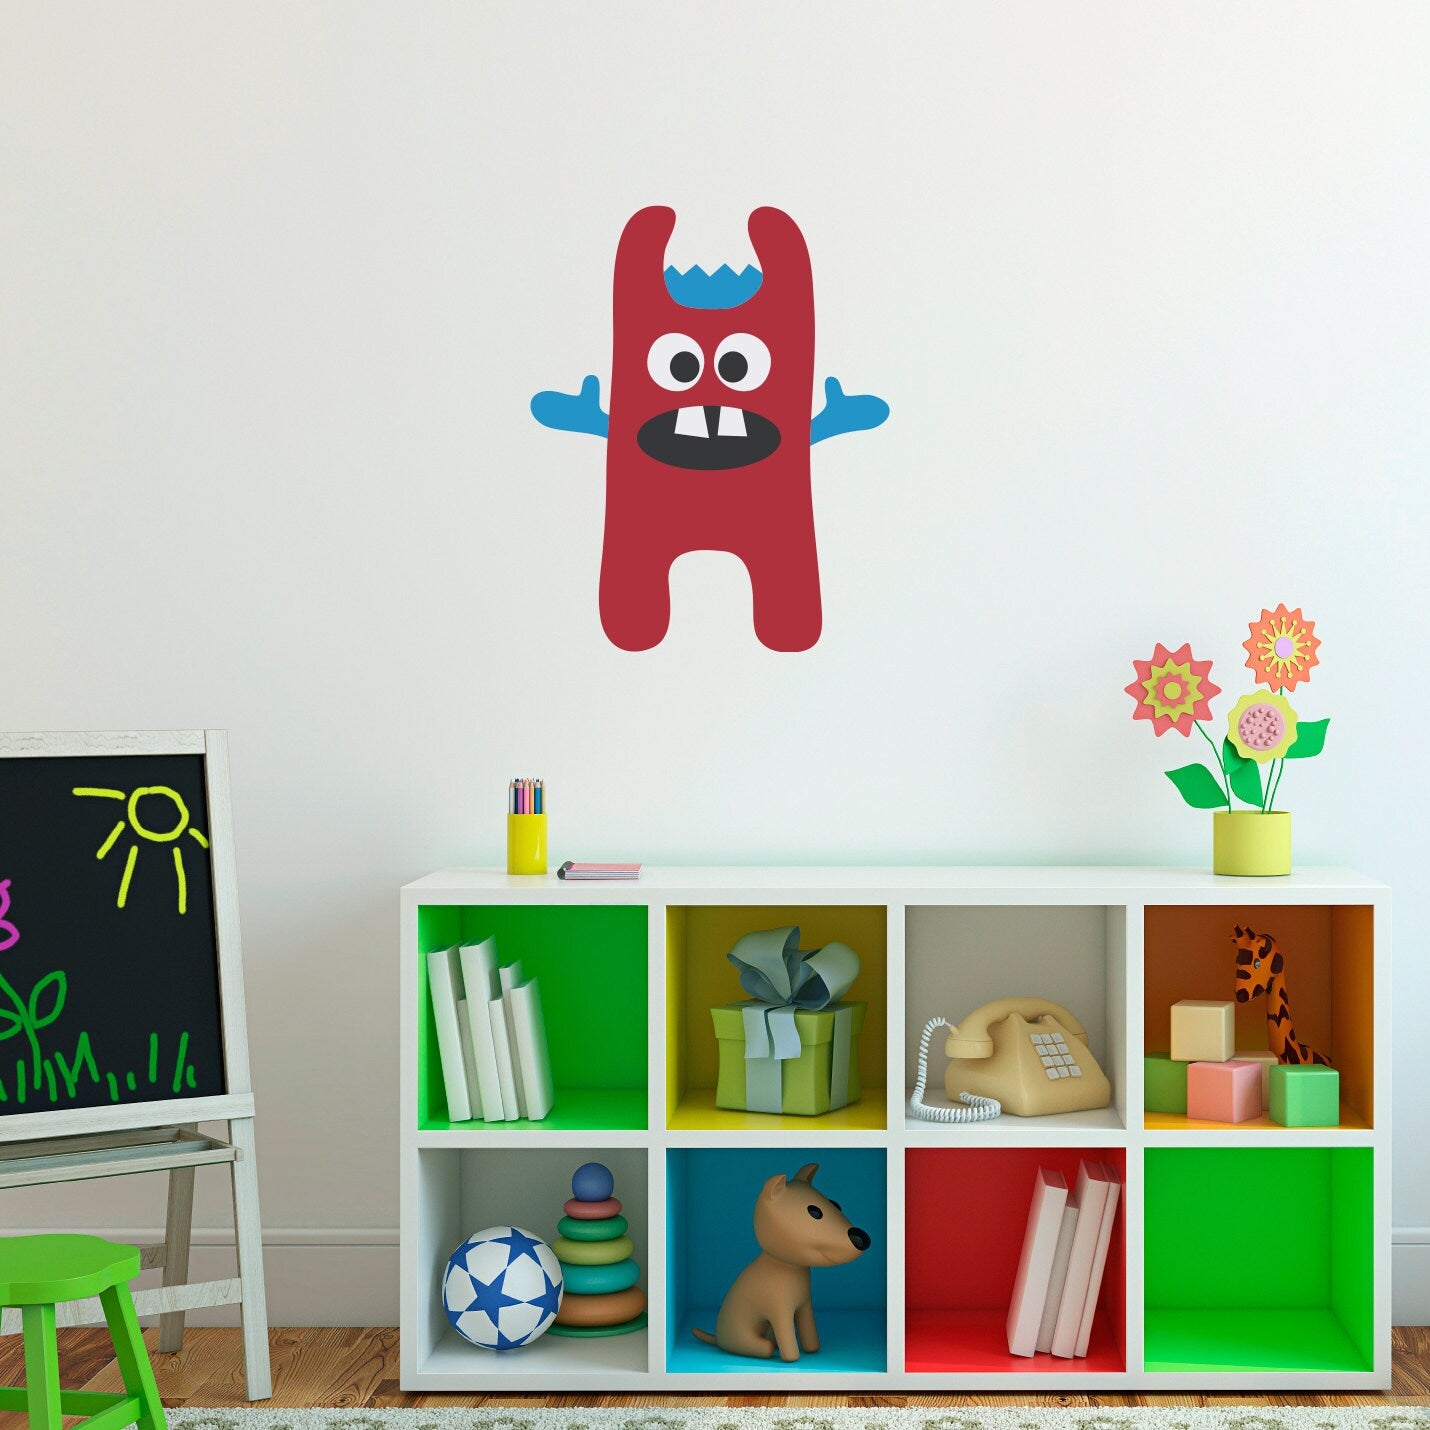 Monster Wall Decal 5 - Monster Wall Decor - Children Wall Decals - Printed Decal